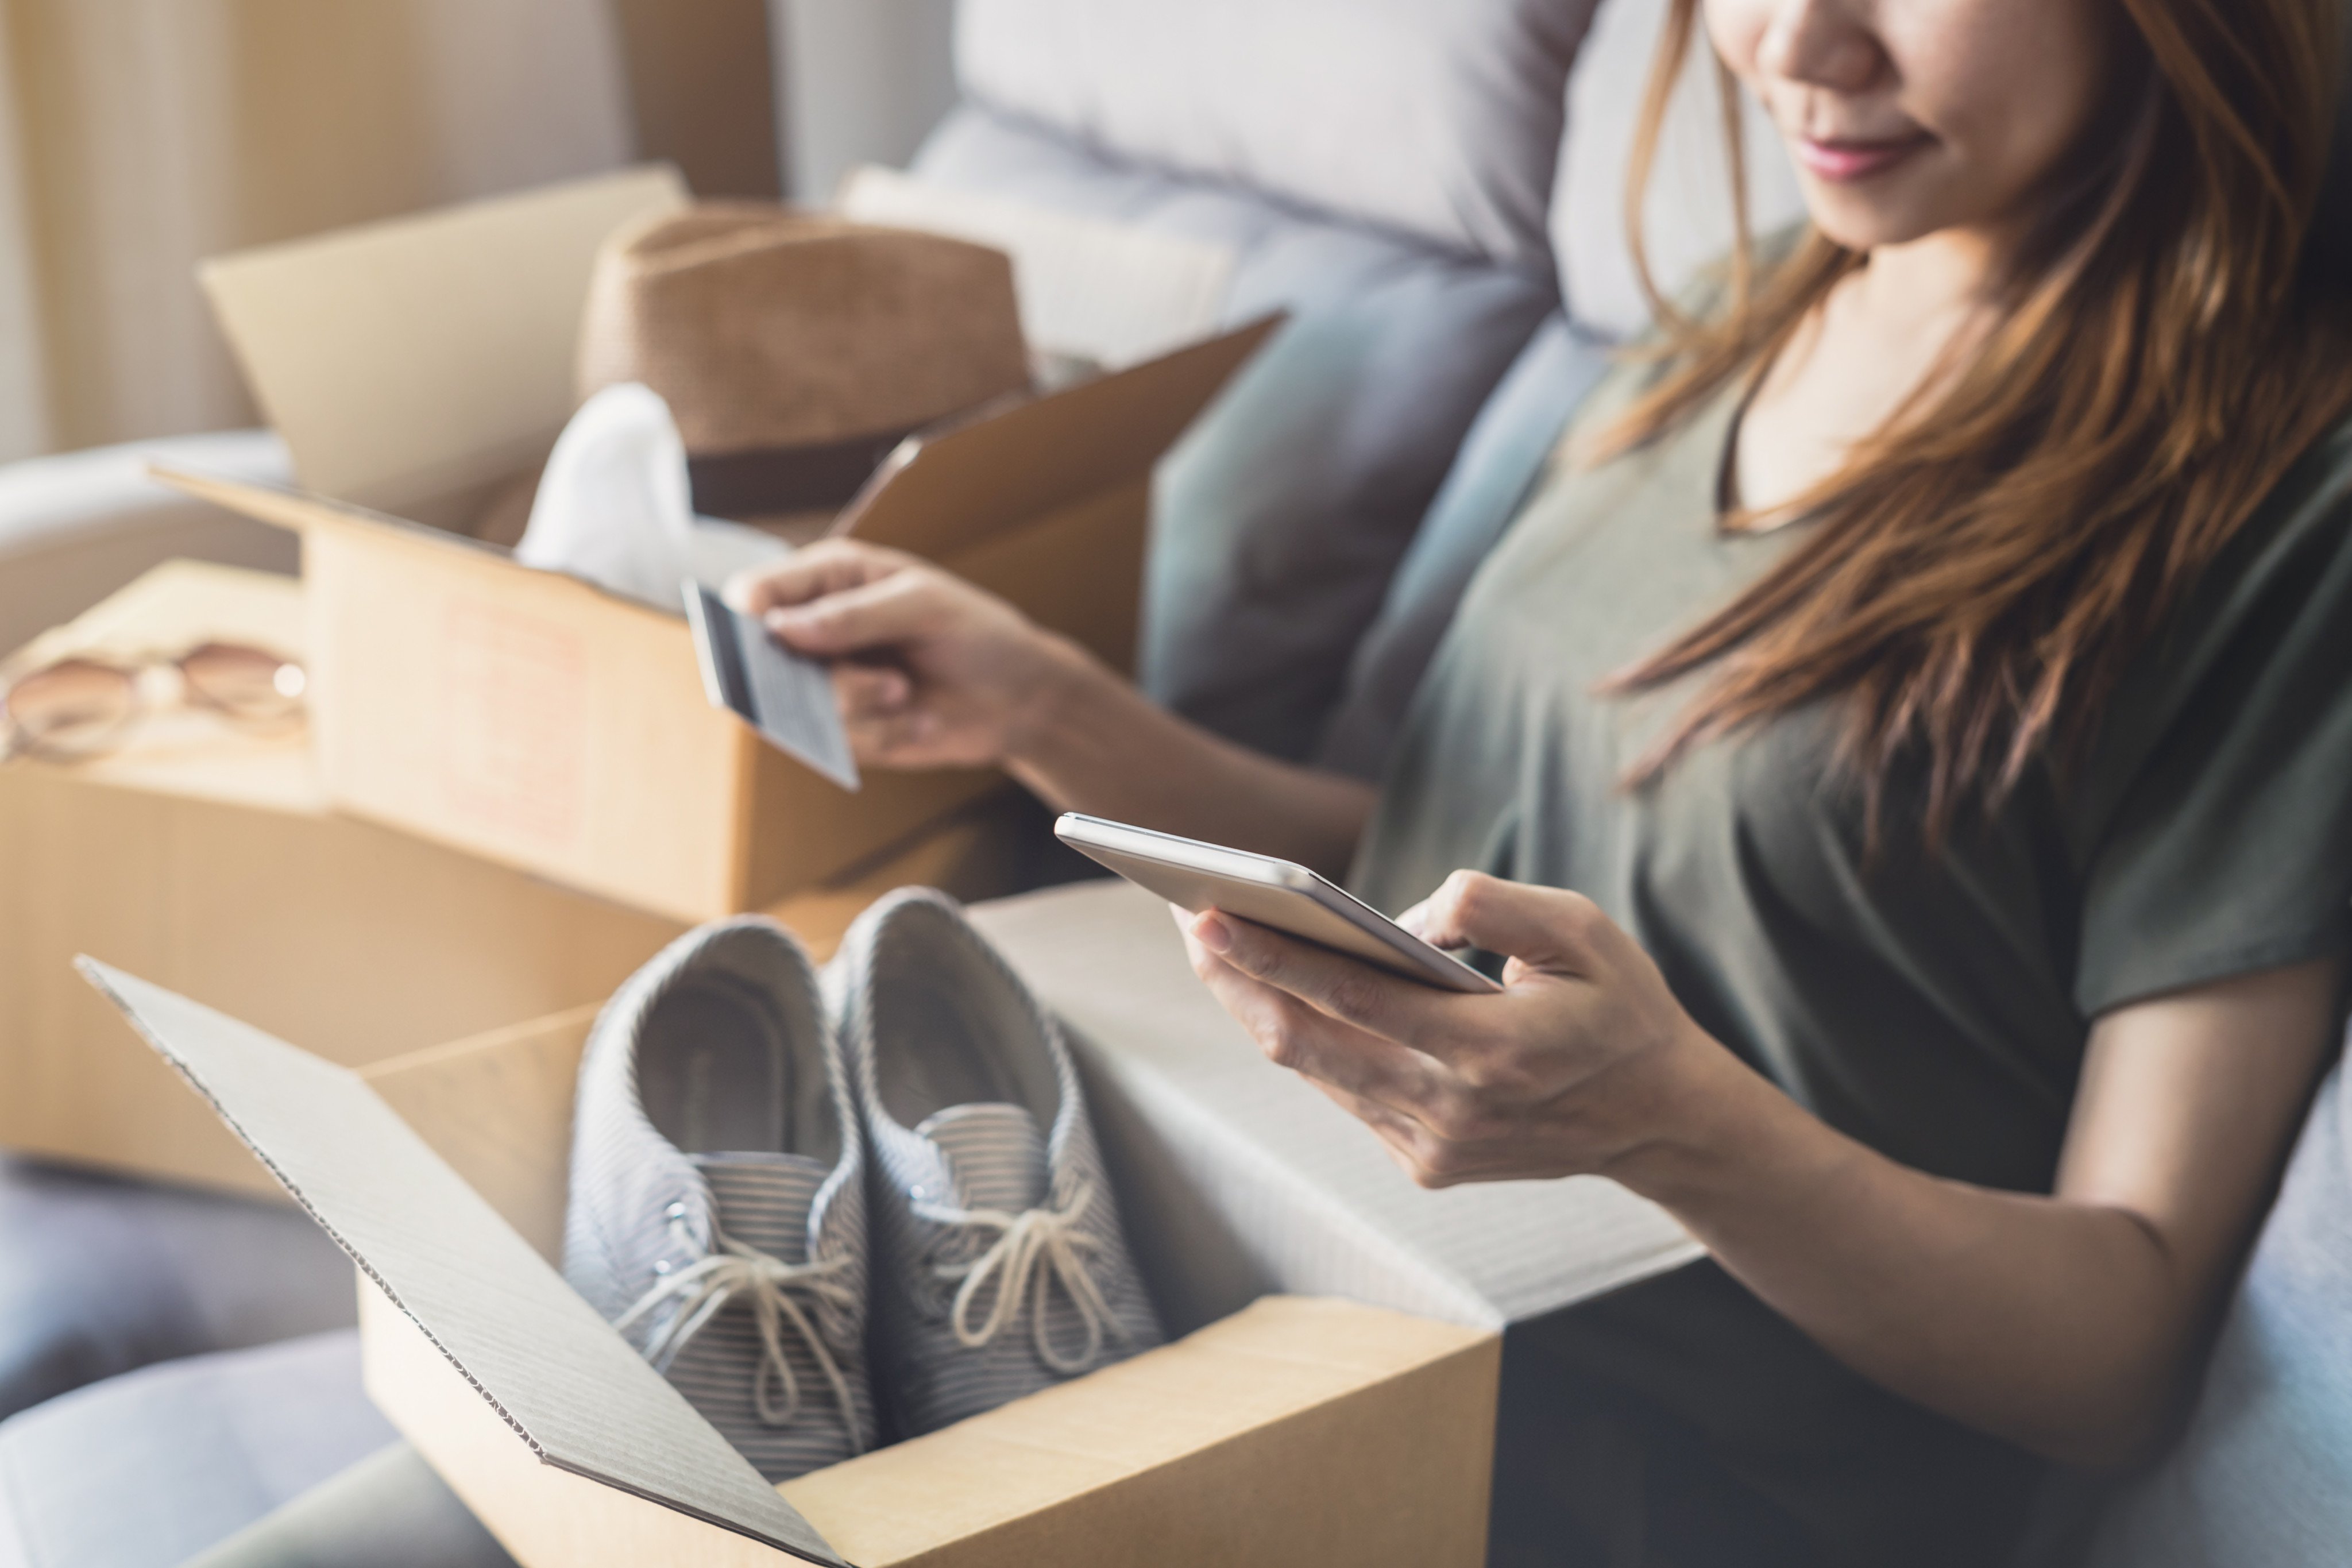 Free returns are ending as more online fast fashion retailers introduce a charge for returning goods. Photo: Shutterstock